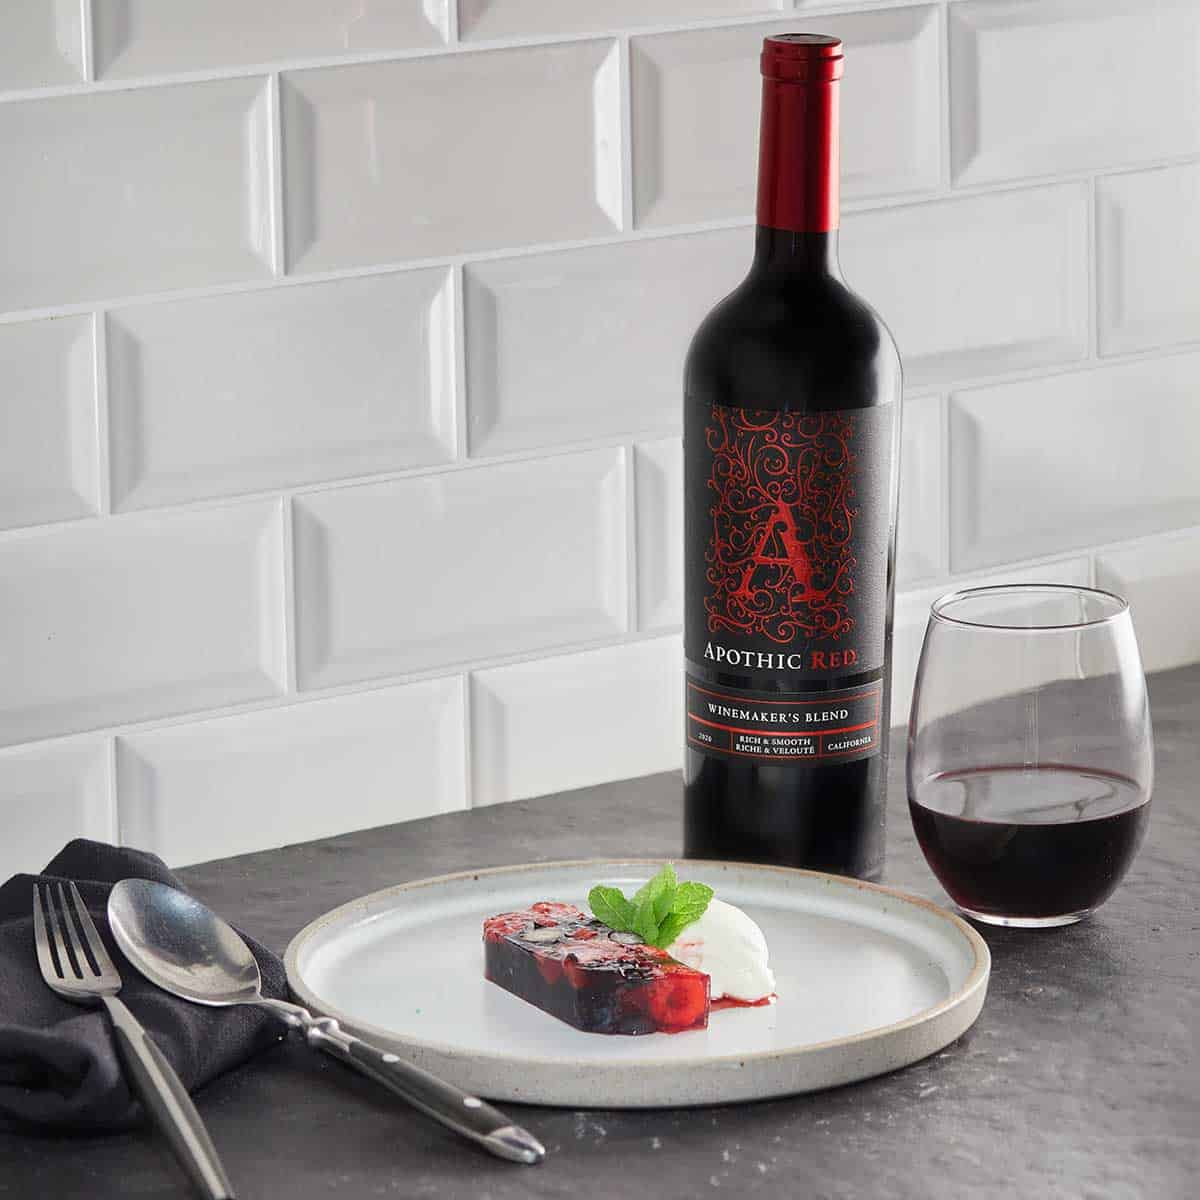 A fruits terrine in a plate in front of a glass and a bottle of Apothic Red